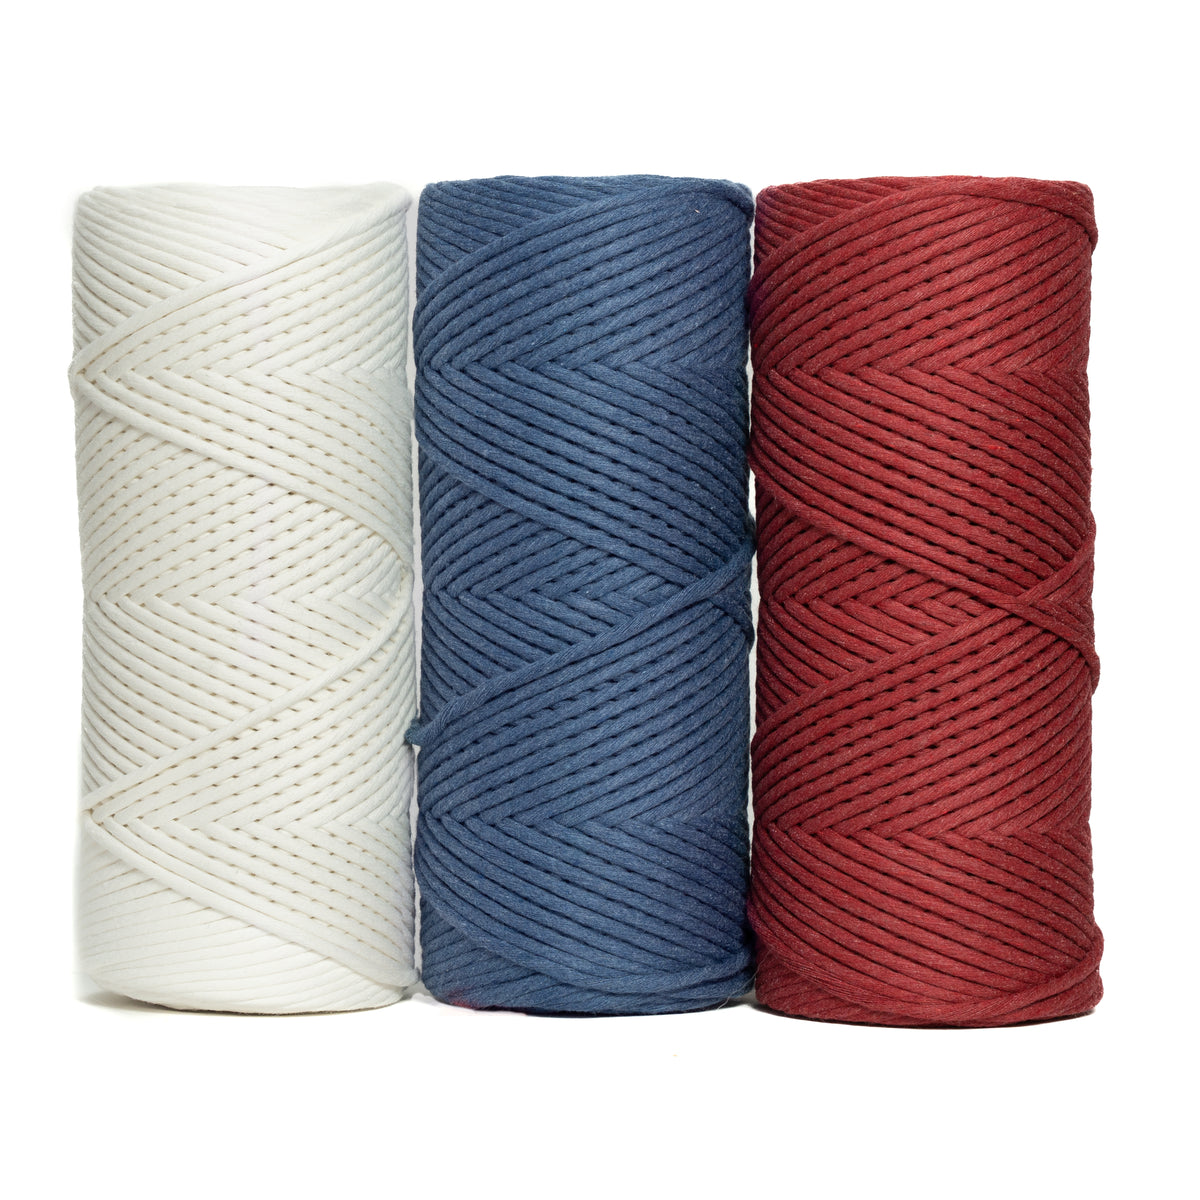 COTTON ROPE ZERO WASTE 5 MM - 3 PLY - NATURAL COLOR